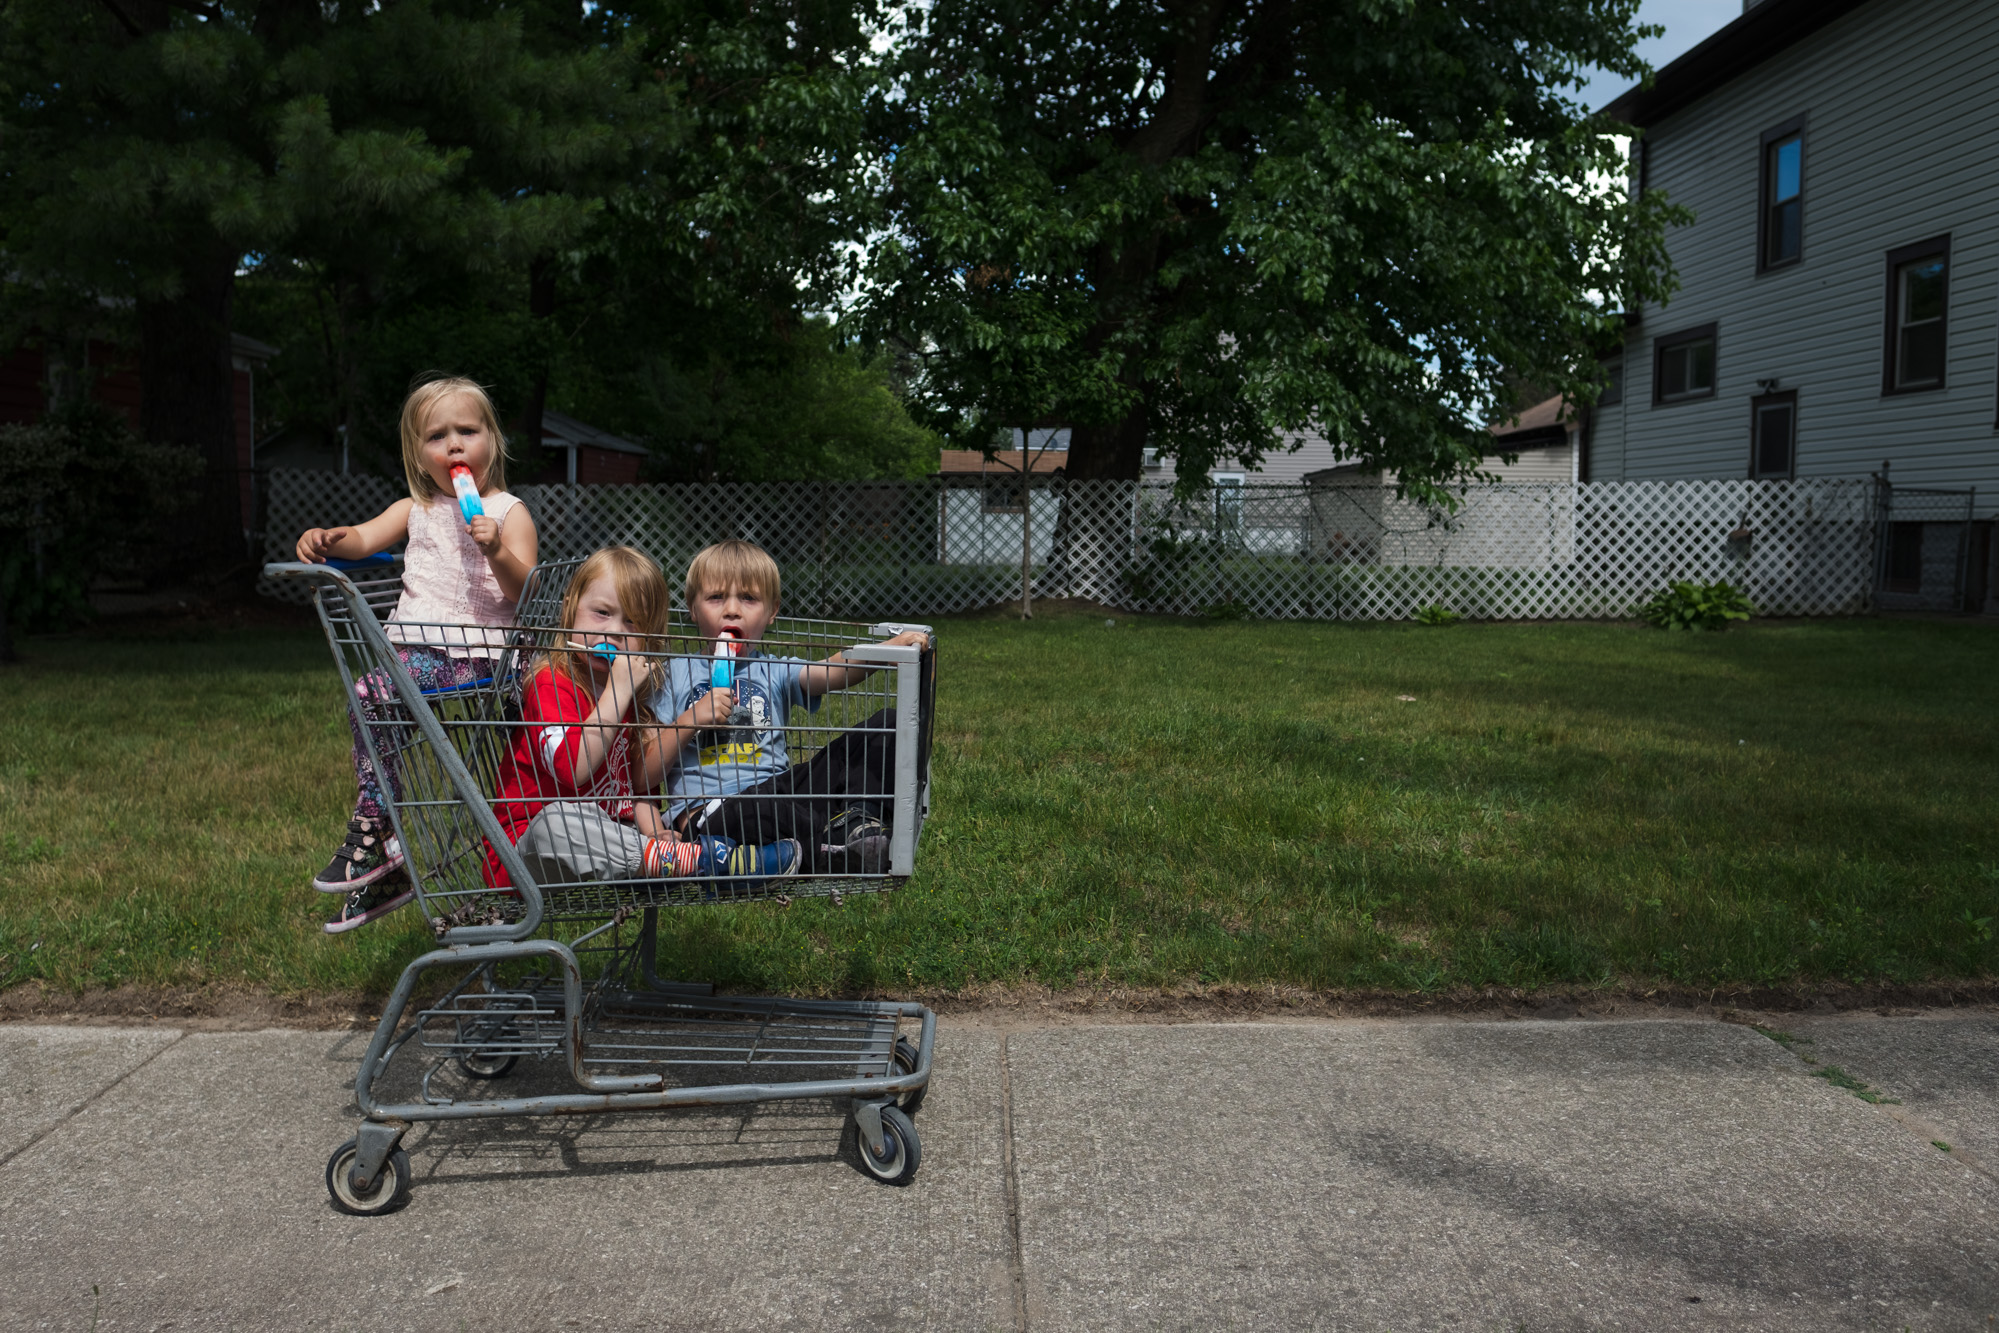 Kids eating popsicle in shopping cart.